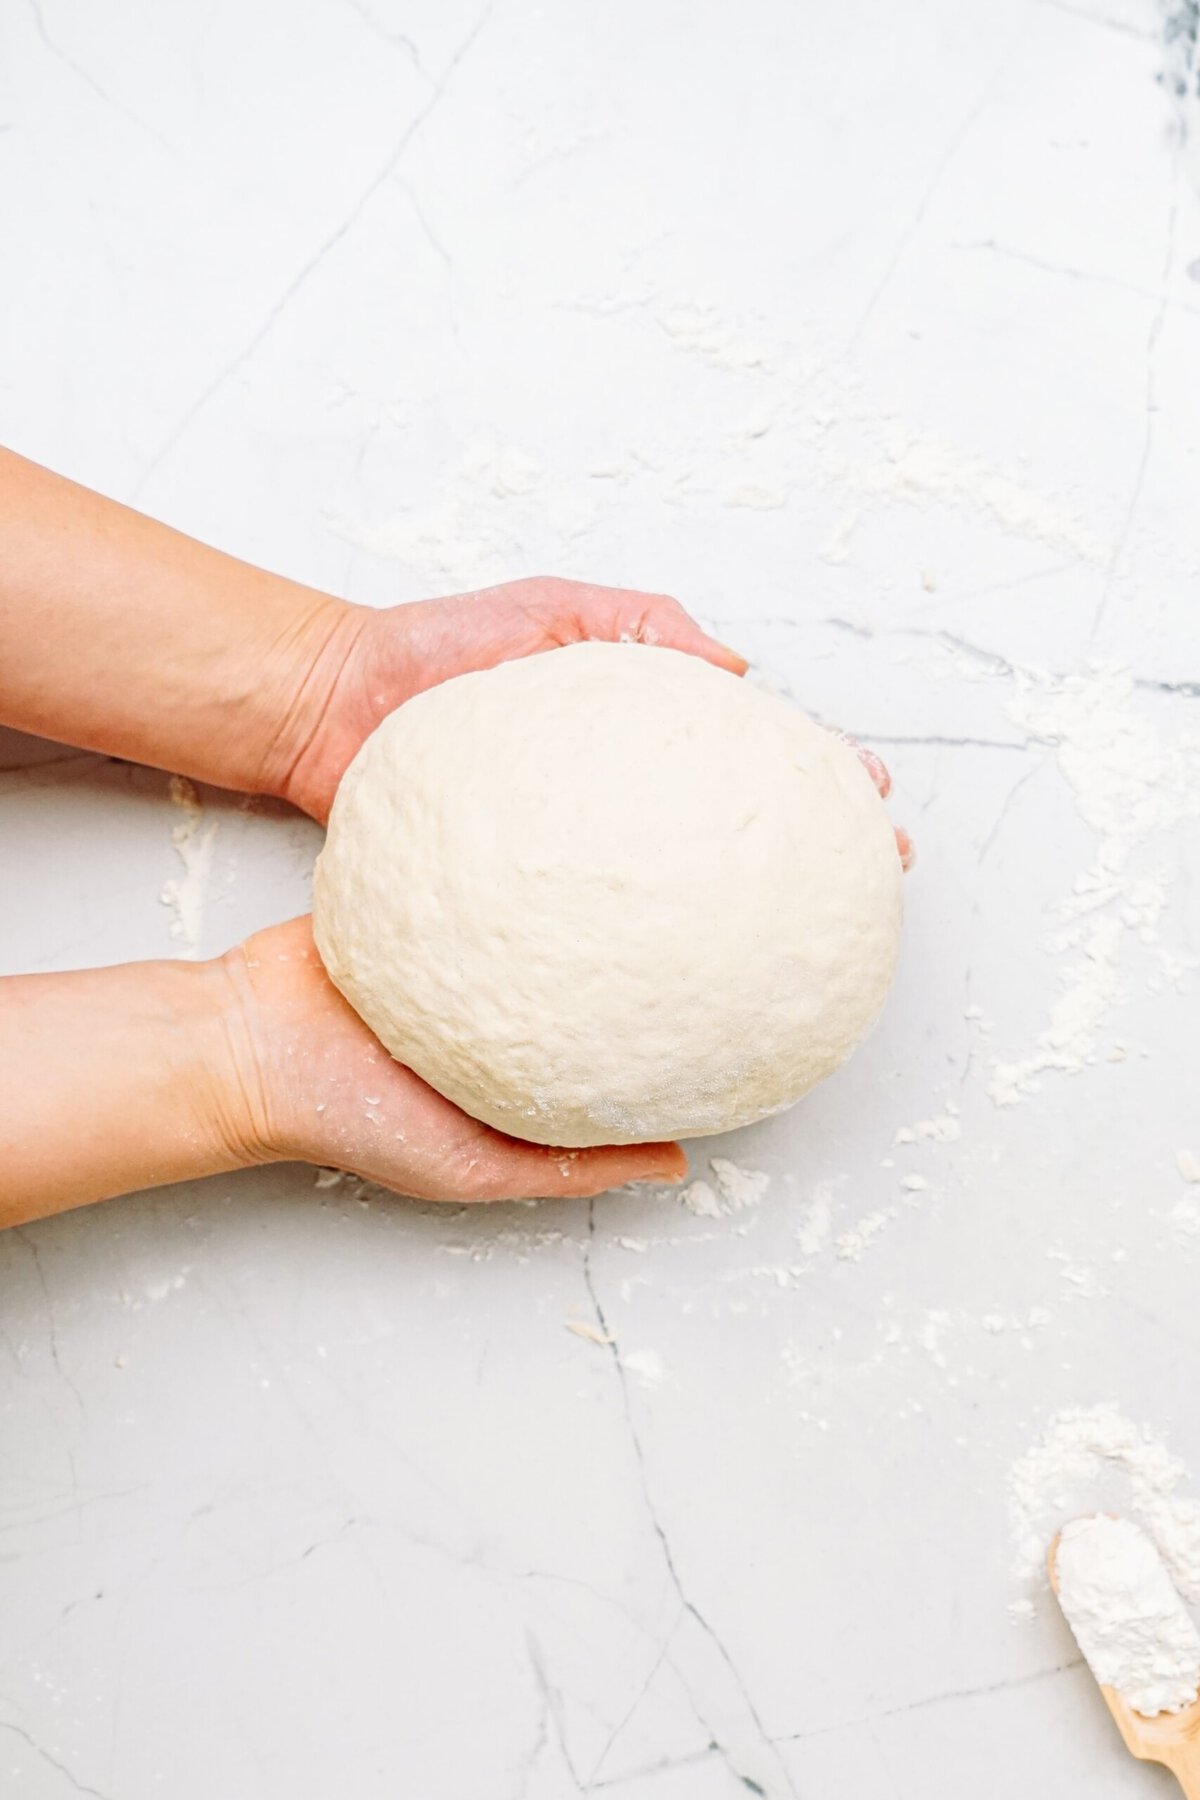 kneaded dough ball in a persons hands